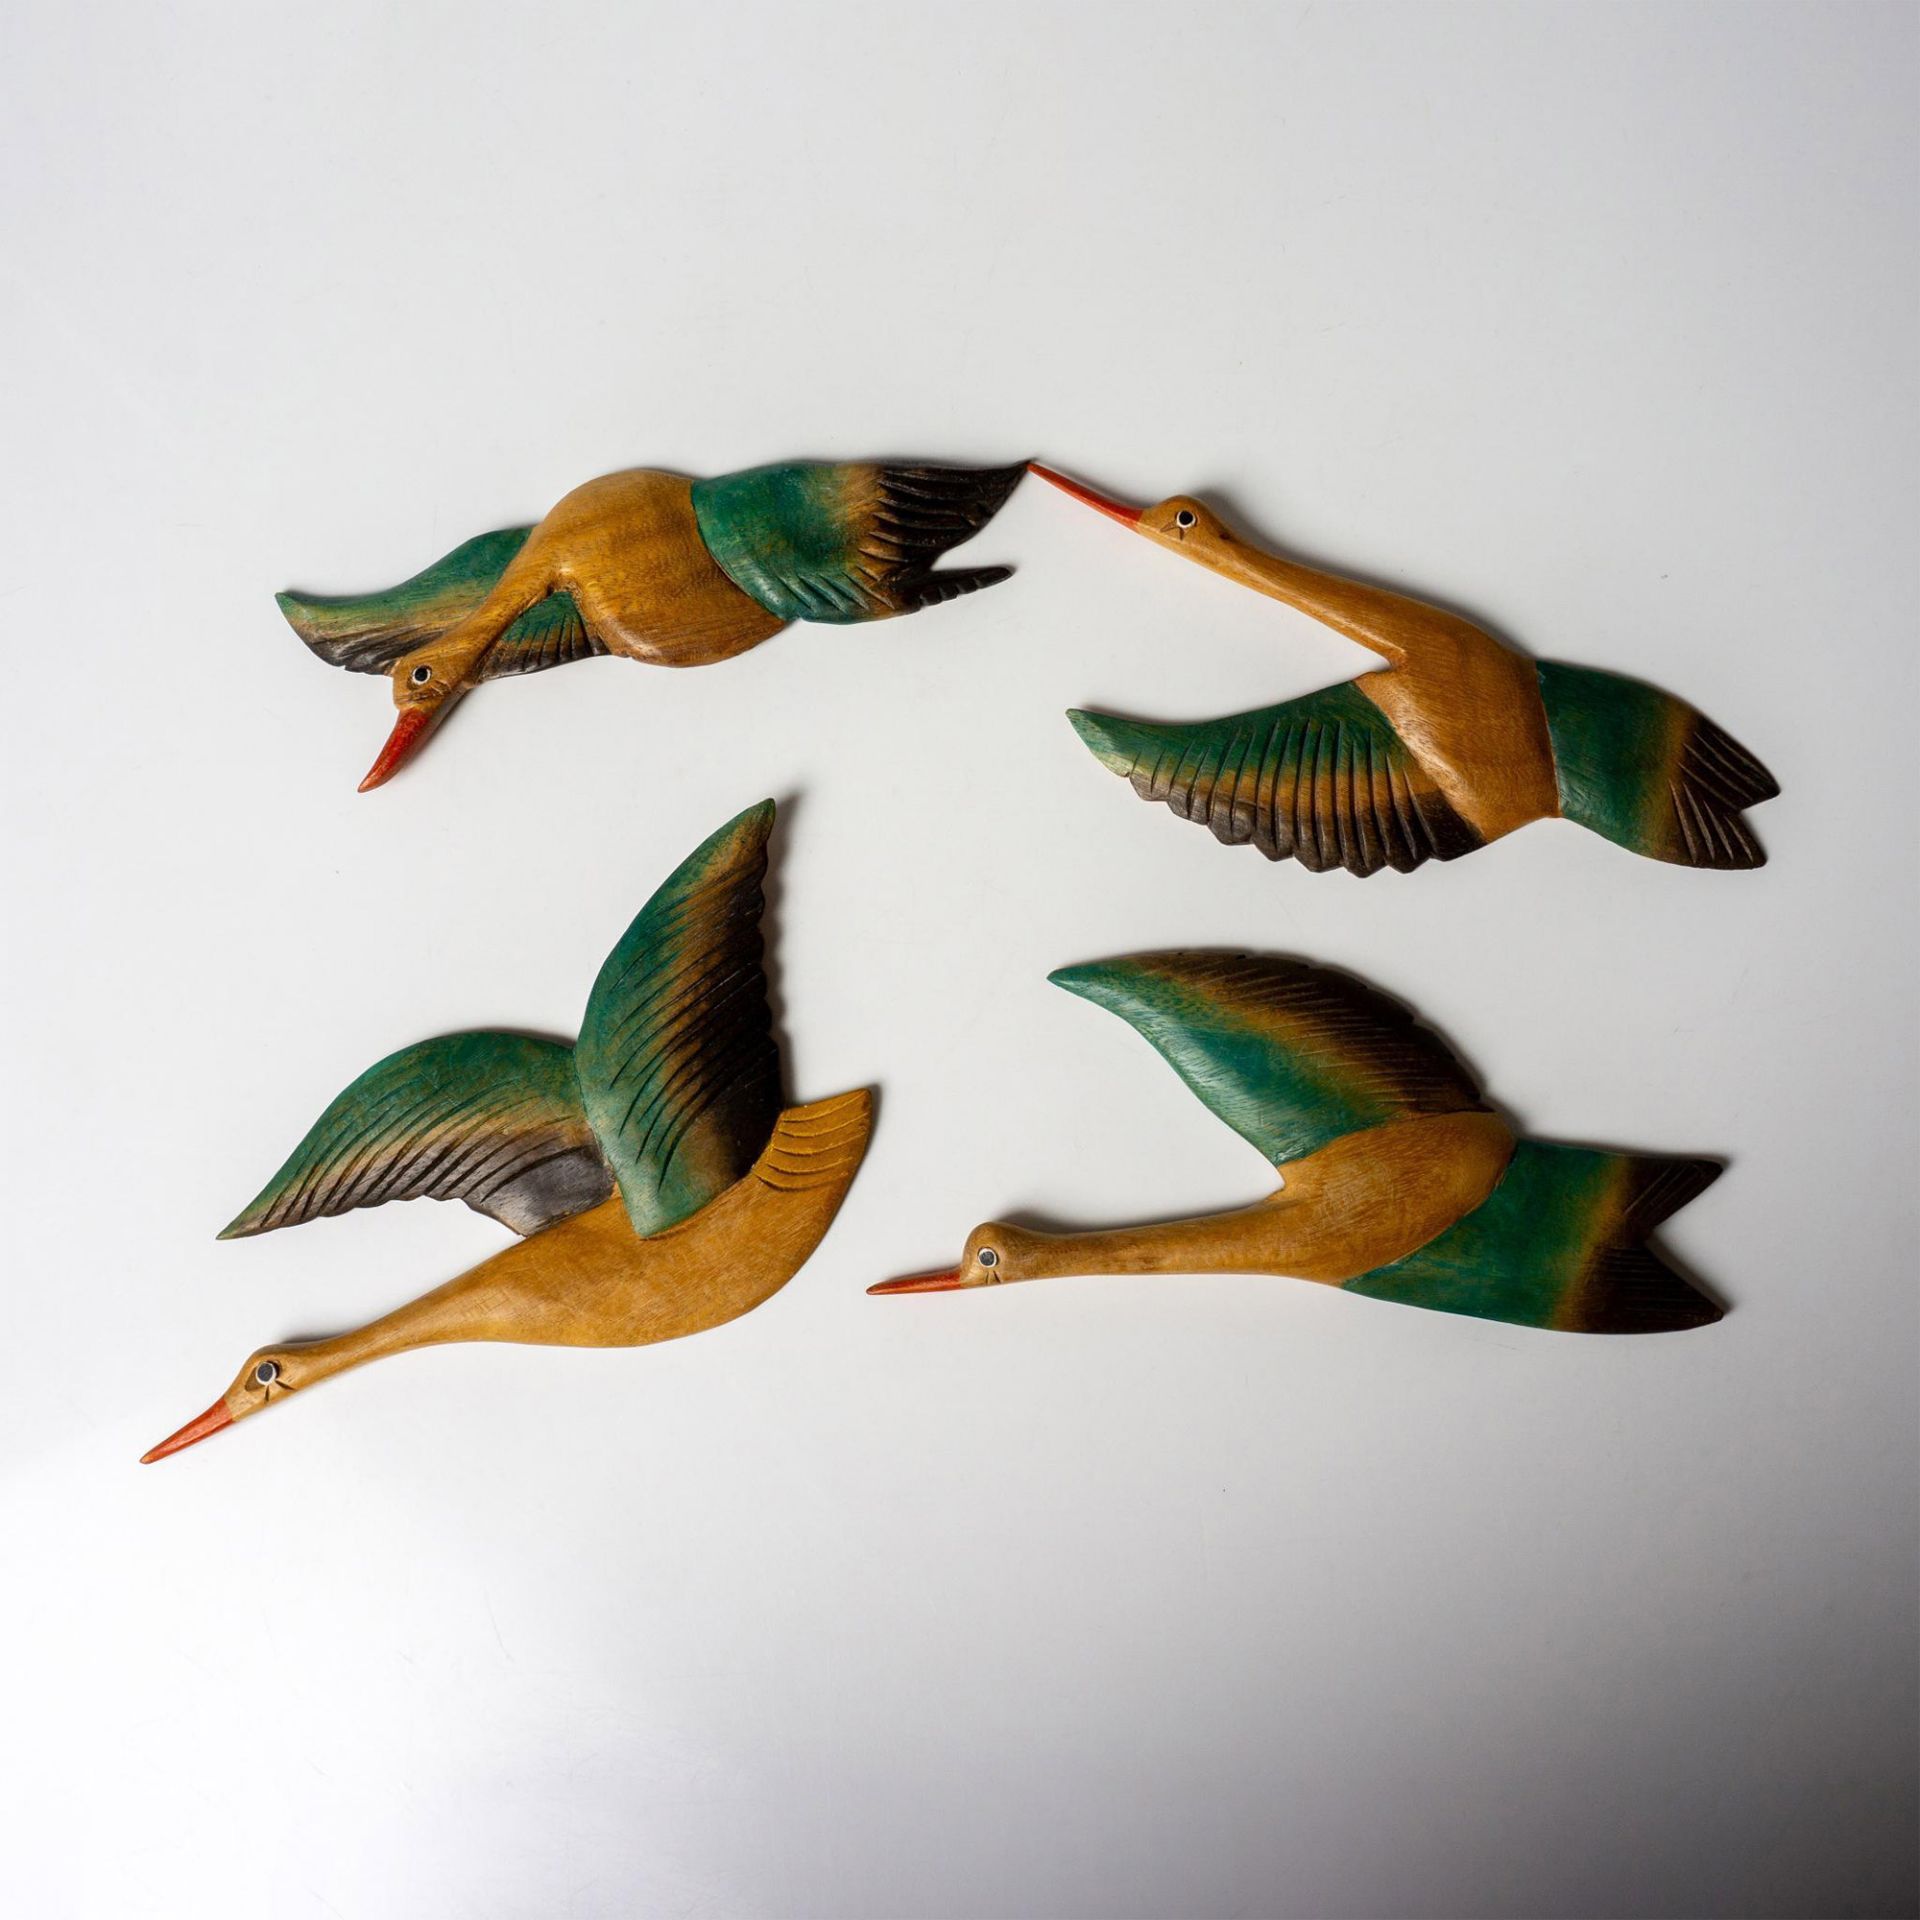 4pc Vintage Wooden Duck Wall Decorations - Image 2 of 3